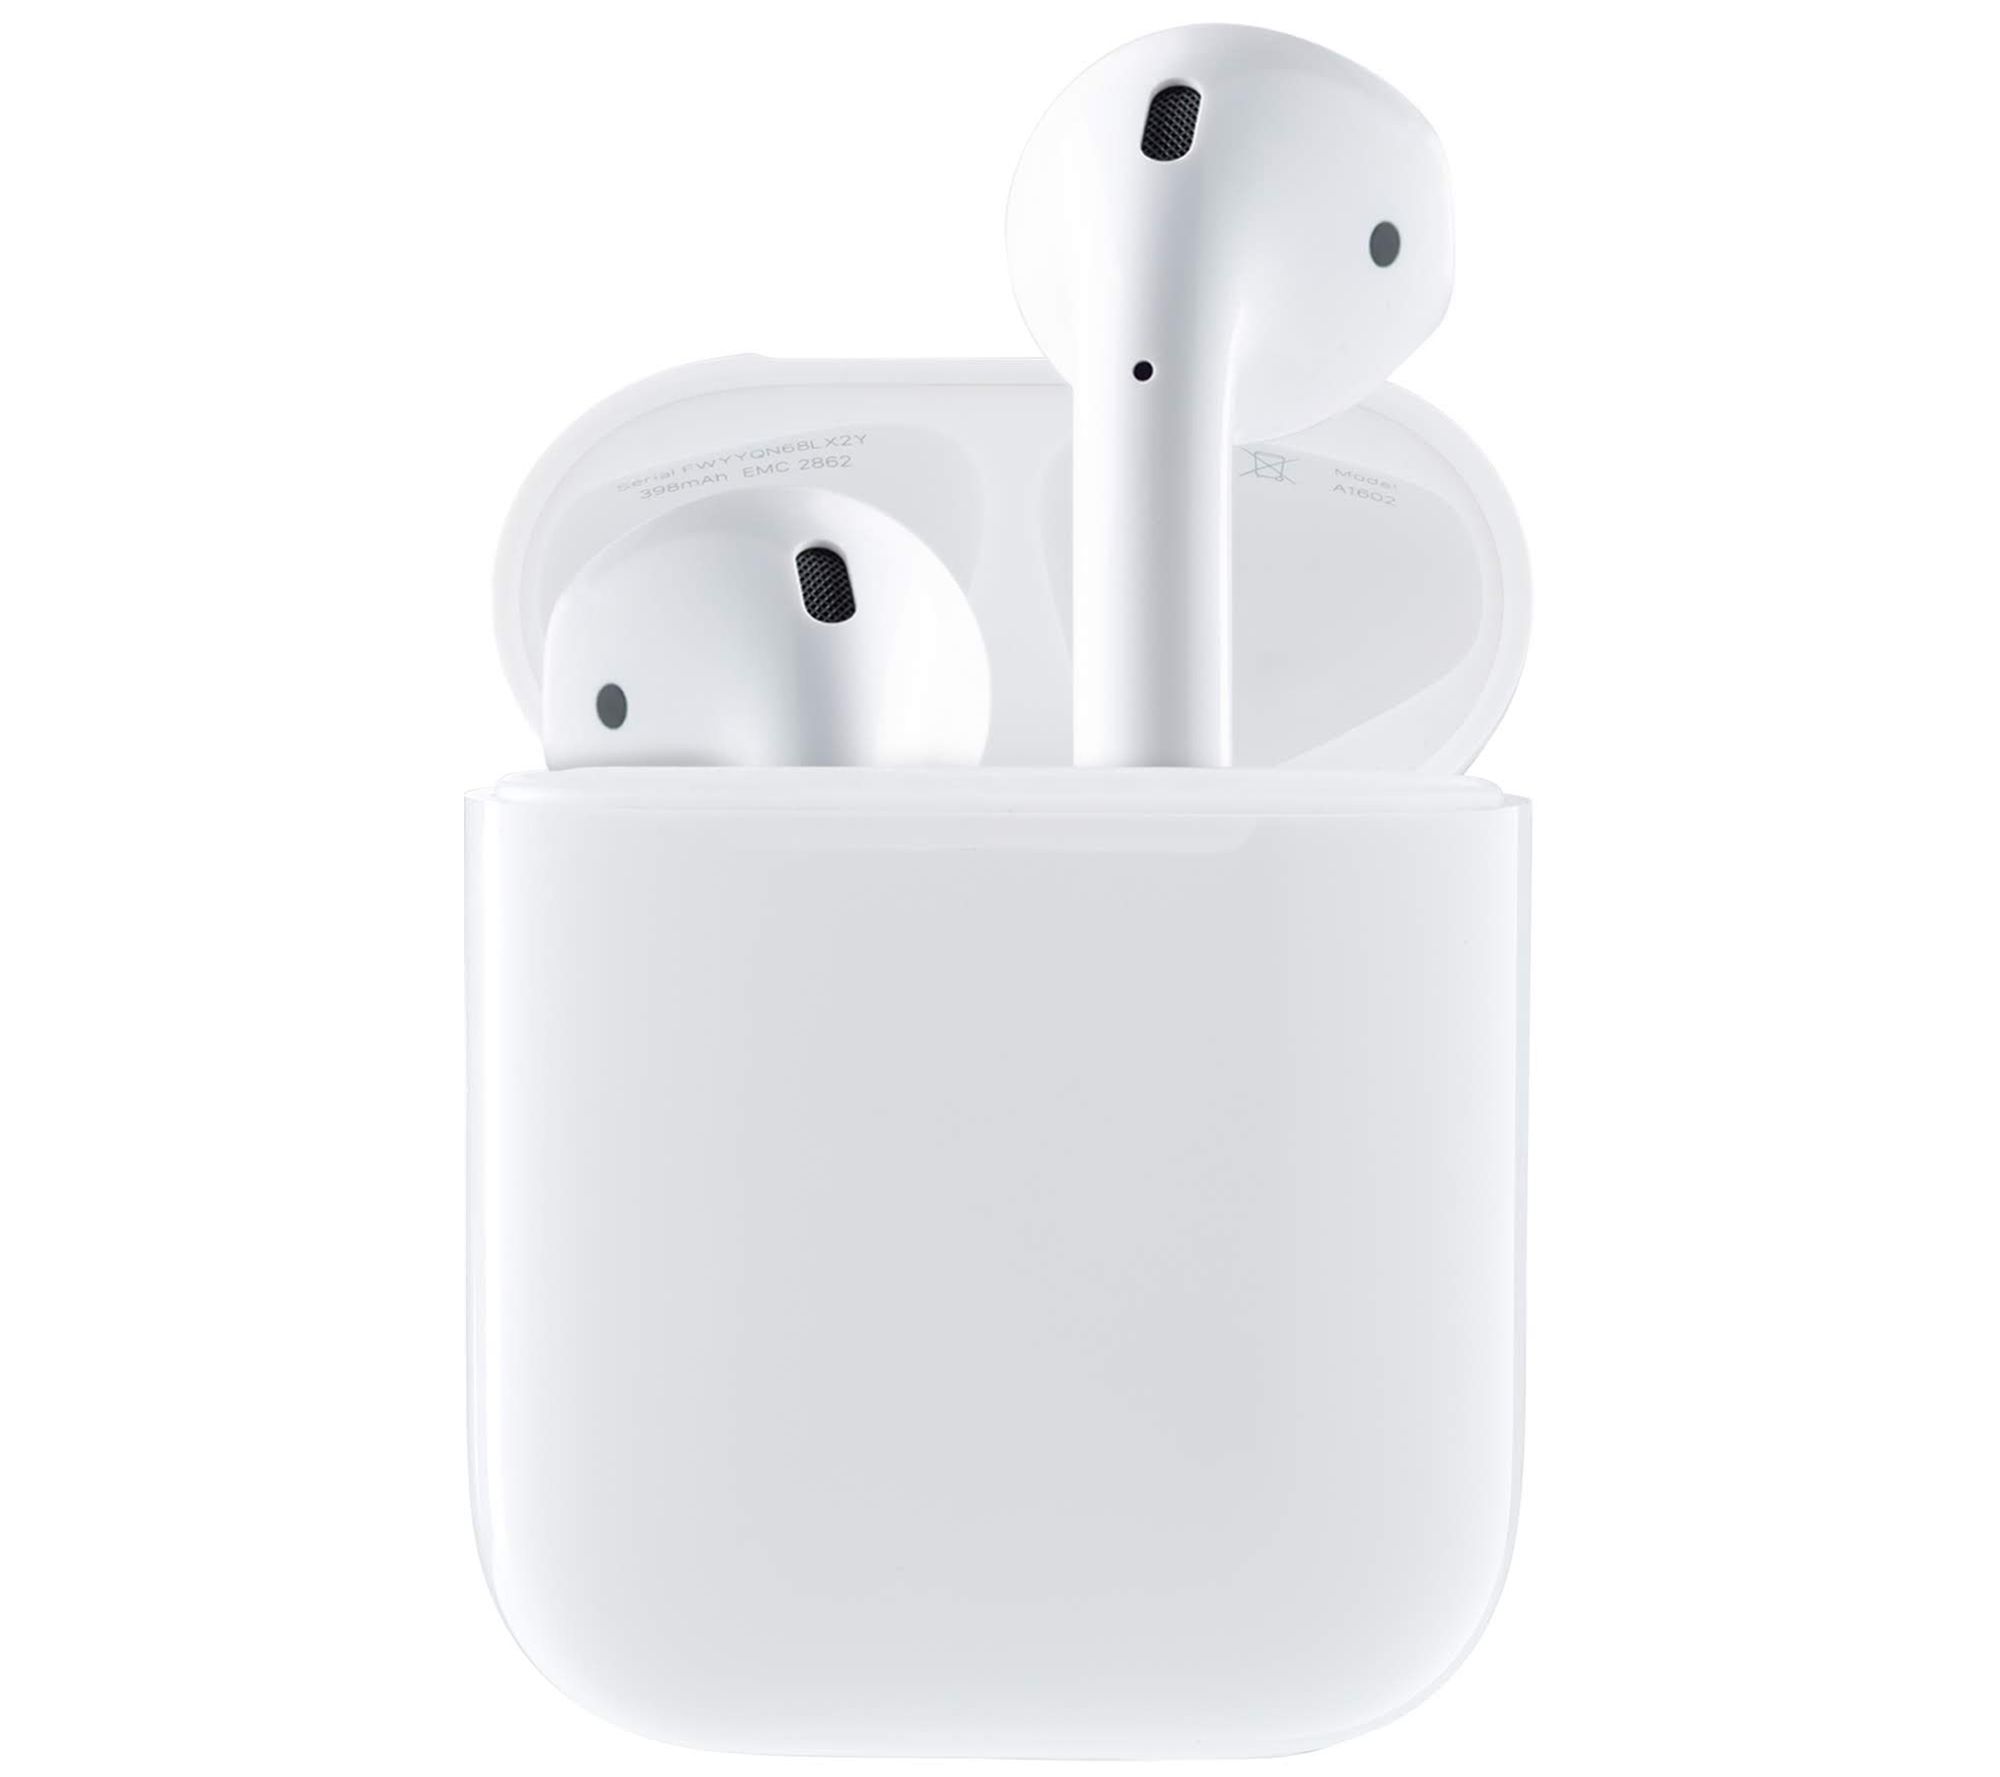 Creep To seek refuge lack Apple Airpods with Wired Charging Case, Voucher & Accessories - QVC.com